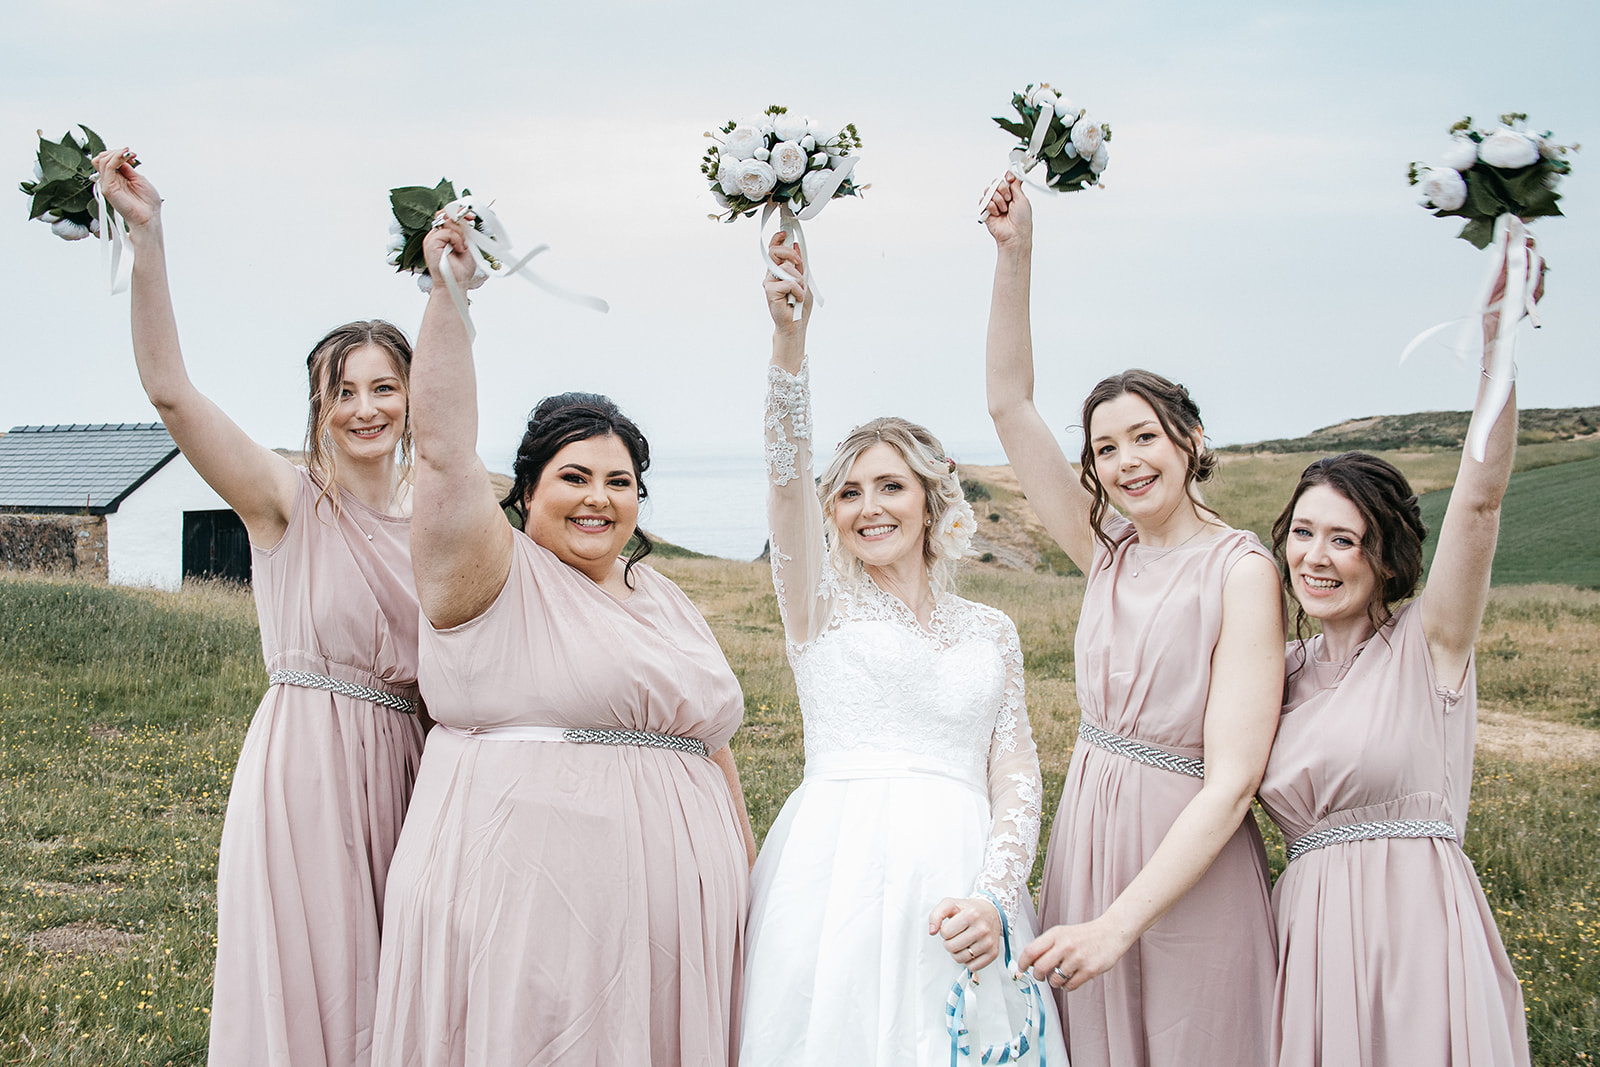 Wedding photography of the bridesmaids at Mwnt